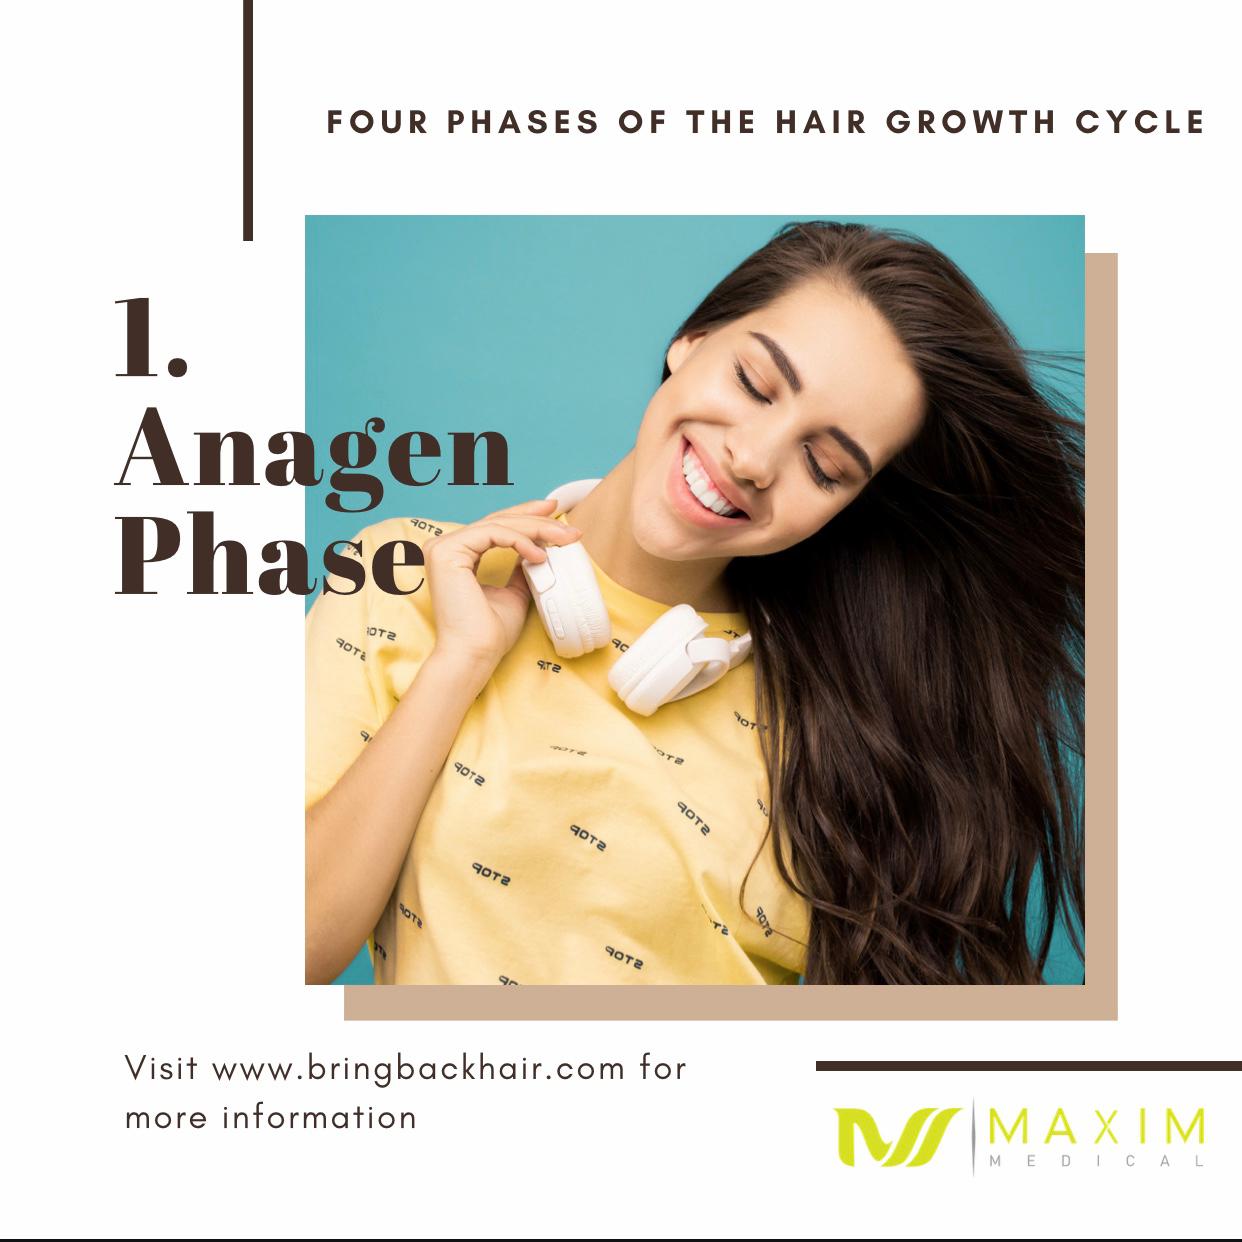 1. Anagen Phase
The Anagen stage is the state in which your hair actually grows. This occurs at an average rate of 0.5 inches per month. The amount of time a hair will remain in the anagen phase varies from person to person, although scientists estimate it is between 4-6 years for scalp hair. On the other hand, body hair is said to have shorter anagen phases. The anagen phase is particularly interesting depending on the type of follicle you are studying. In men and women with Androgenic Alopecia, the hormone Dihydrotestosterone (DHT) shortens the anagen phase and  miniaturizes the follicles on the vertex of the scalp, whereas androgenic hair, such as chest hair and beards, are dependent upon Dihydrotestosterone to grow. The anagen phase can also be cut short through a number of factors including stress, poor diet, and ageing. Once the Anagen phase ends, the Catagen phase begins